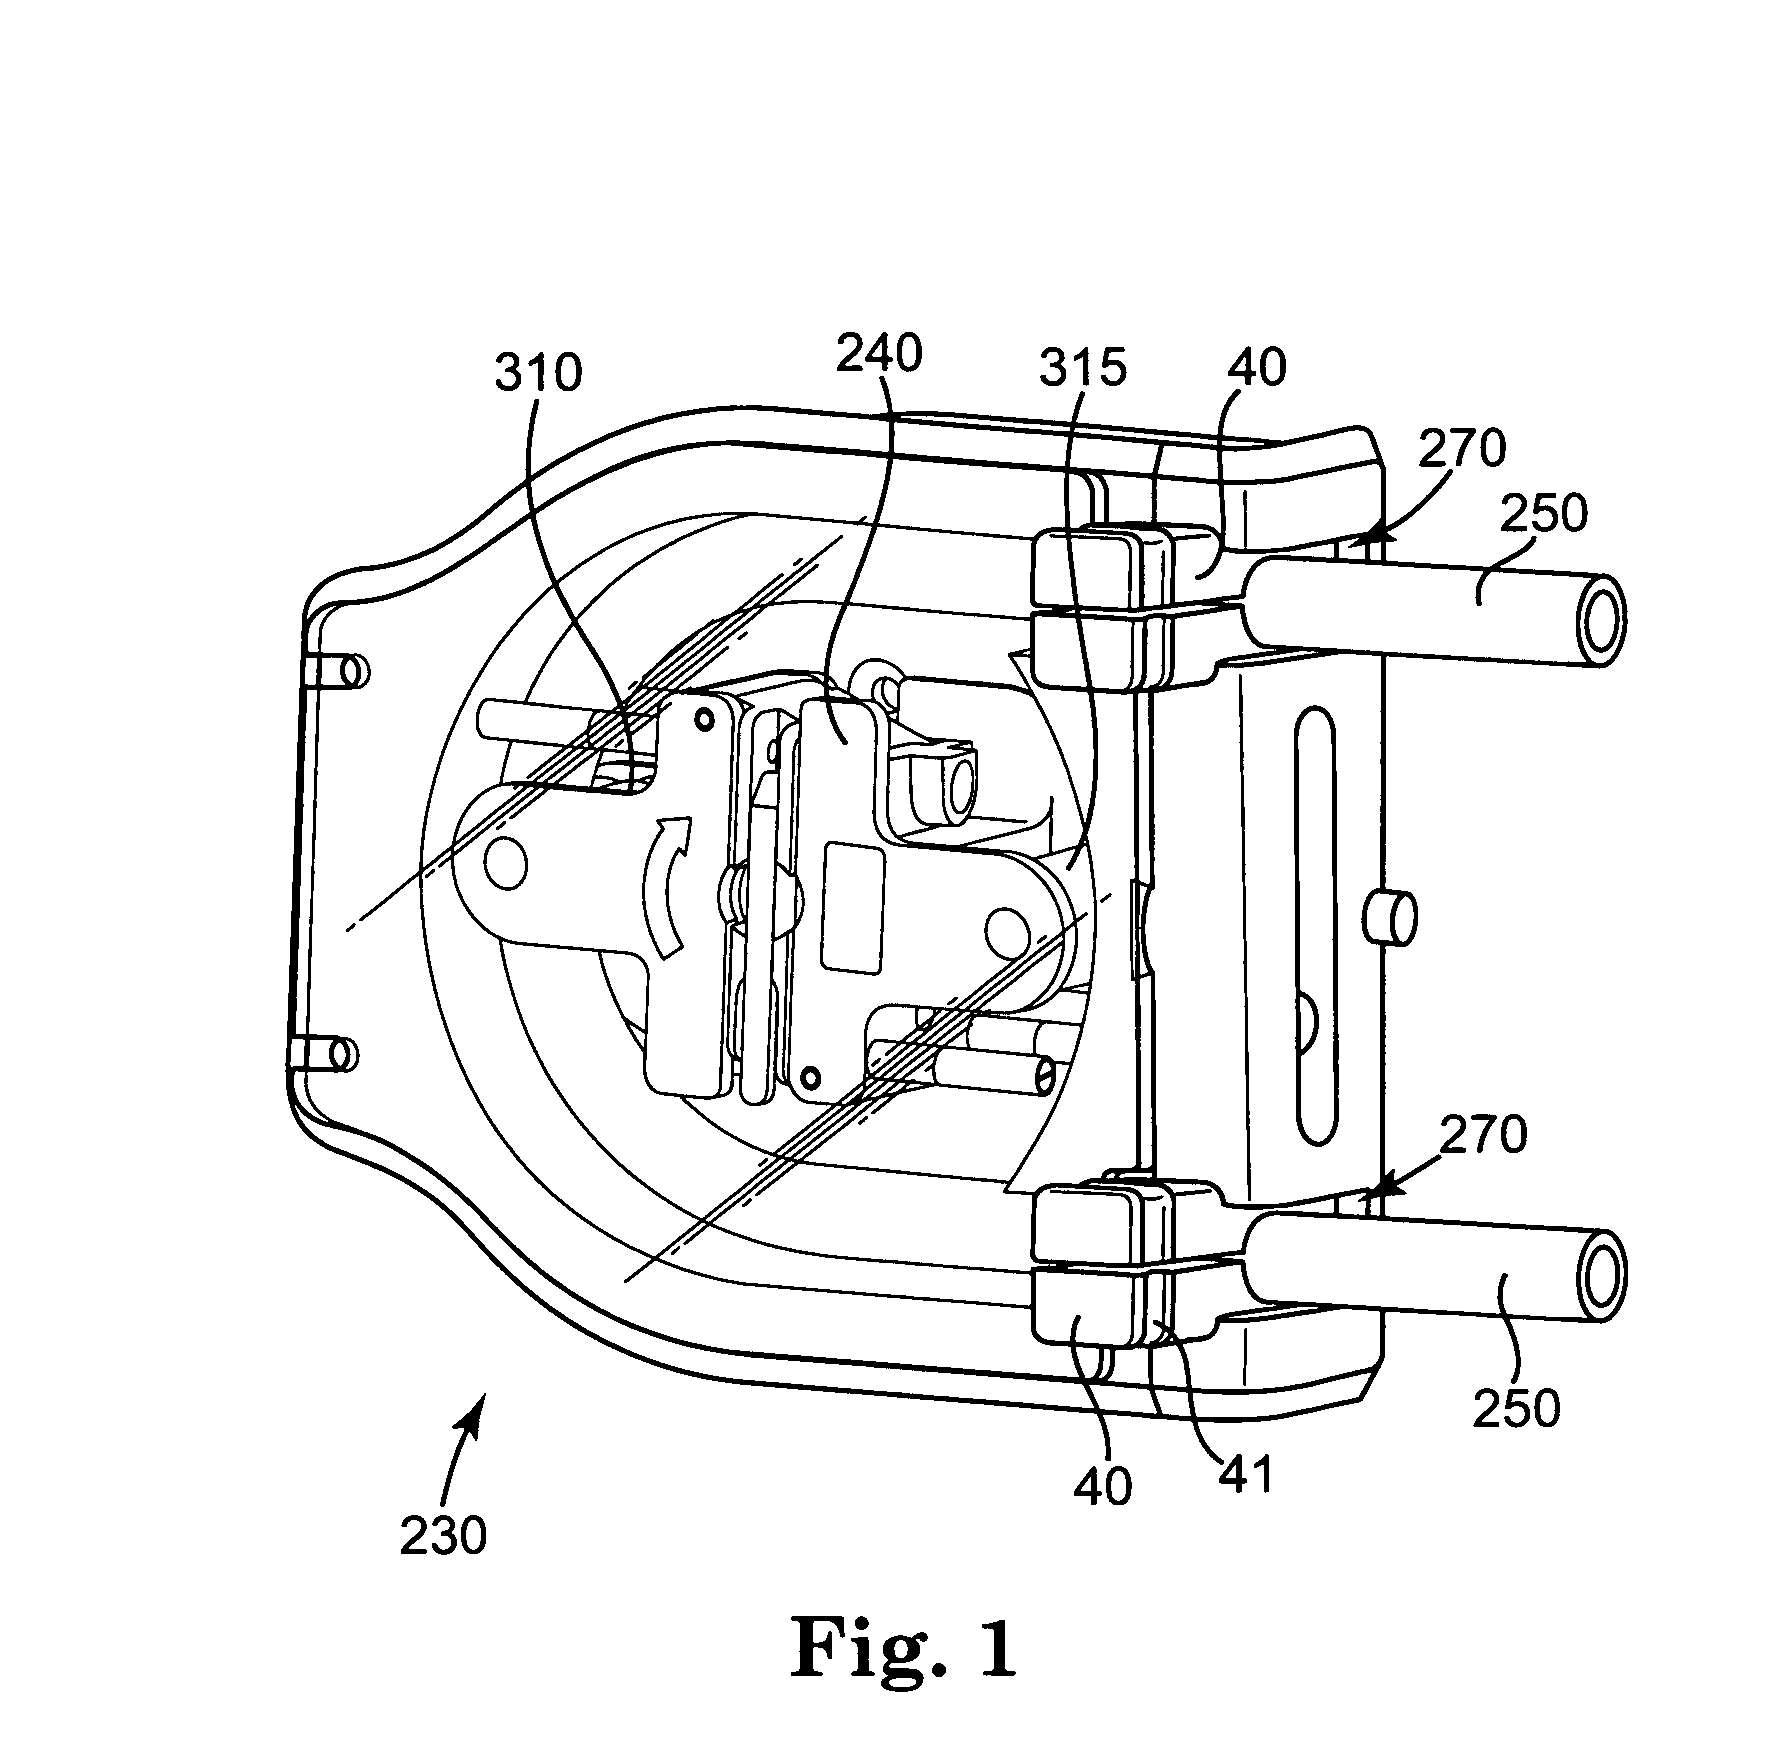 Tubing holding device for roller pumps